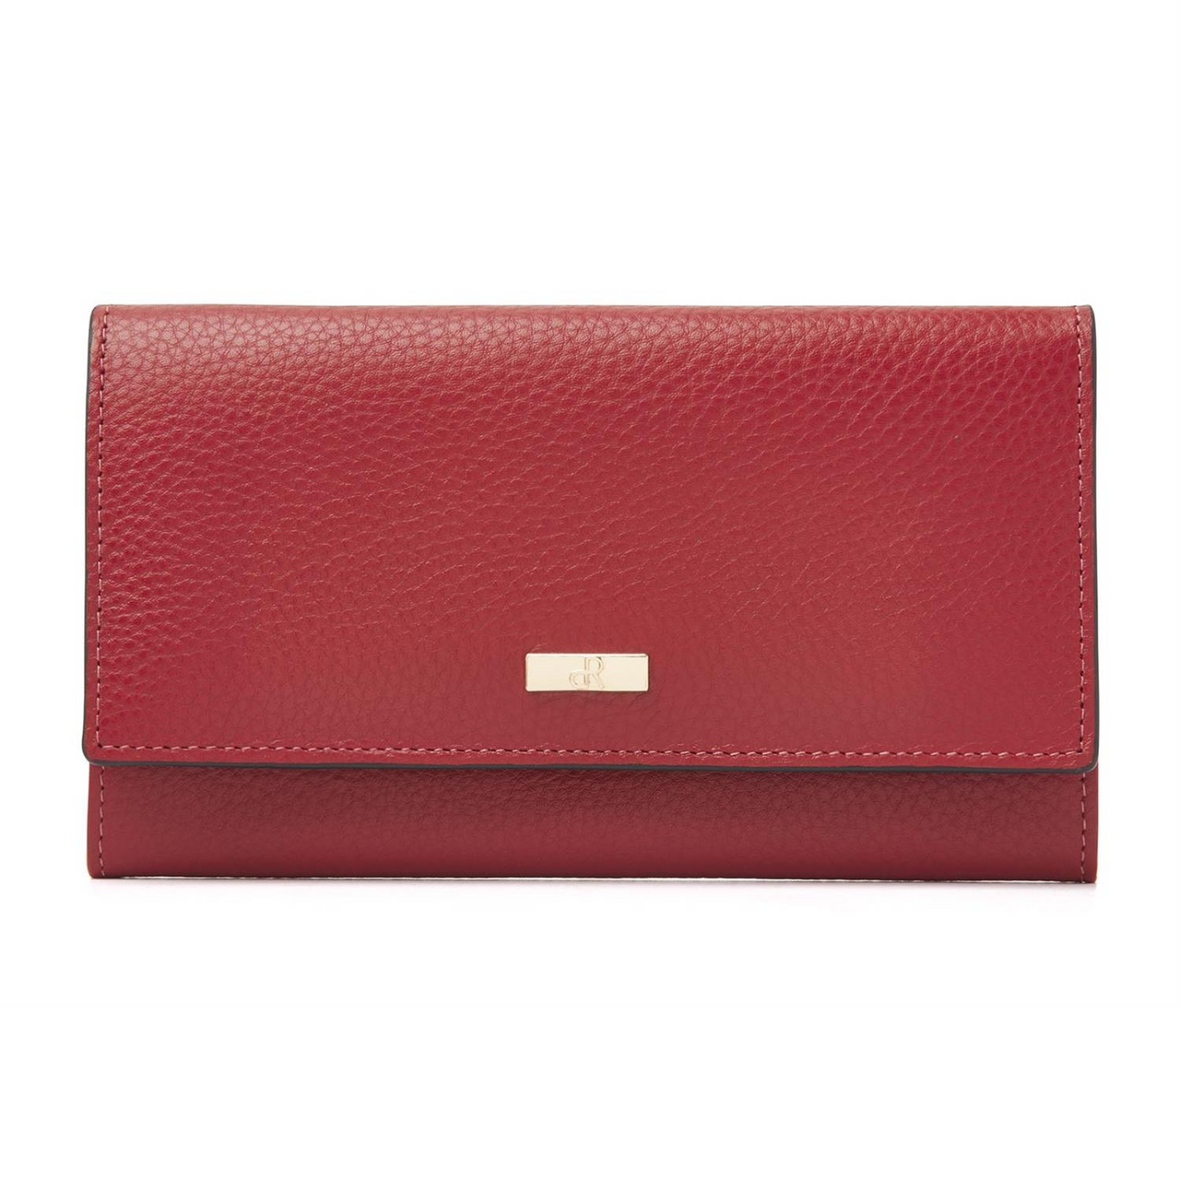 Dr Amsterdam Purse | Red